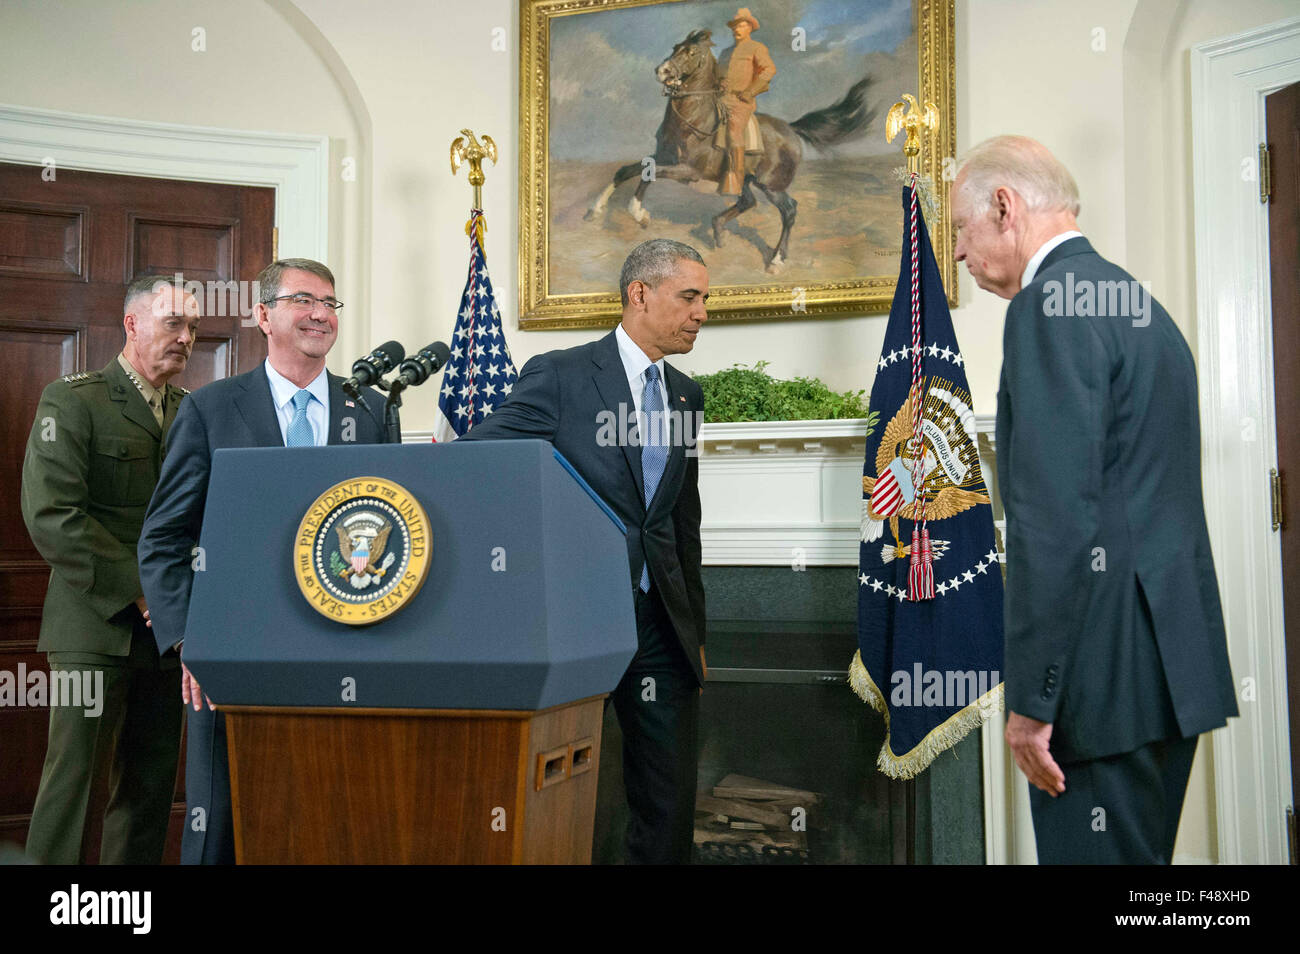 United States President Barack Obama departs the Roosevelt Room after announcing he will keep 5,500 US troops in Afghanistan when he leaves office in 2017 and explains his reasoning for that action in the Roosevelt Room of the White House in Washington, DC on Thursday, October 15, 2015. From left to right: US Marine Corps General Joseph F. Dunford, Chairman, Joint Chiefs of Staff; US Secretary of Defense Ashton Carter; the President, and US Vice President Joe Biden. Credit: Ron Sachs/Pool via CNP - NO WIRE SERVICE - Stock Photo